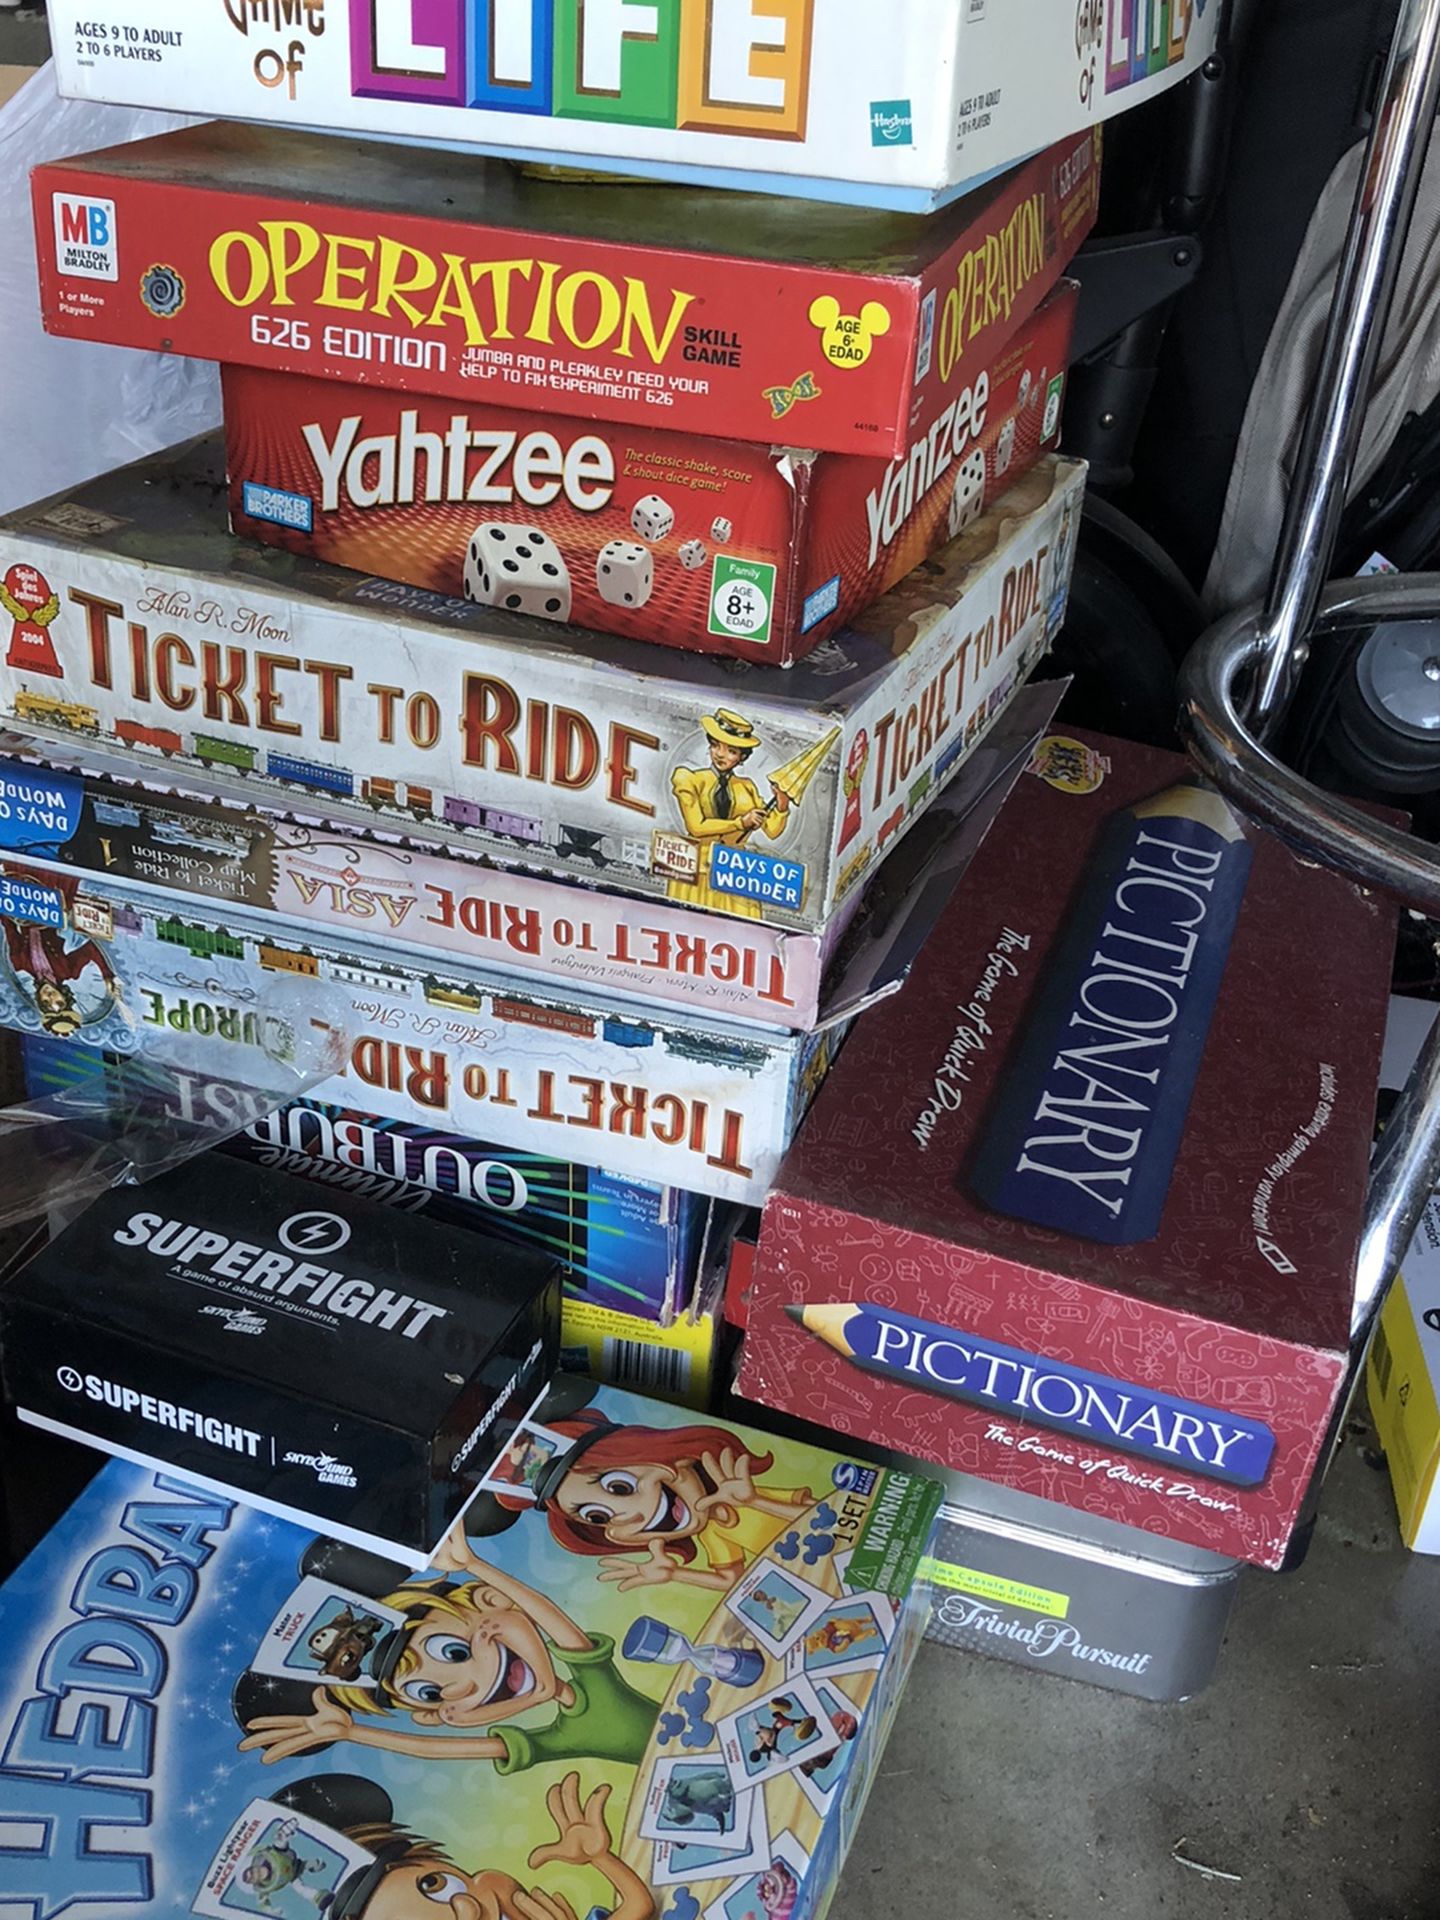 Used Board Games